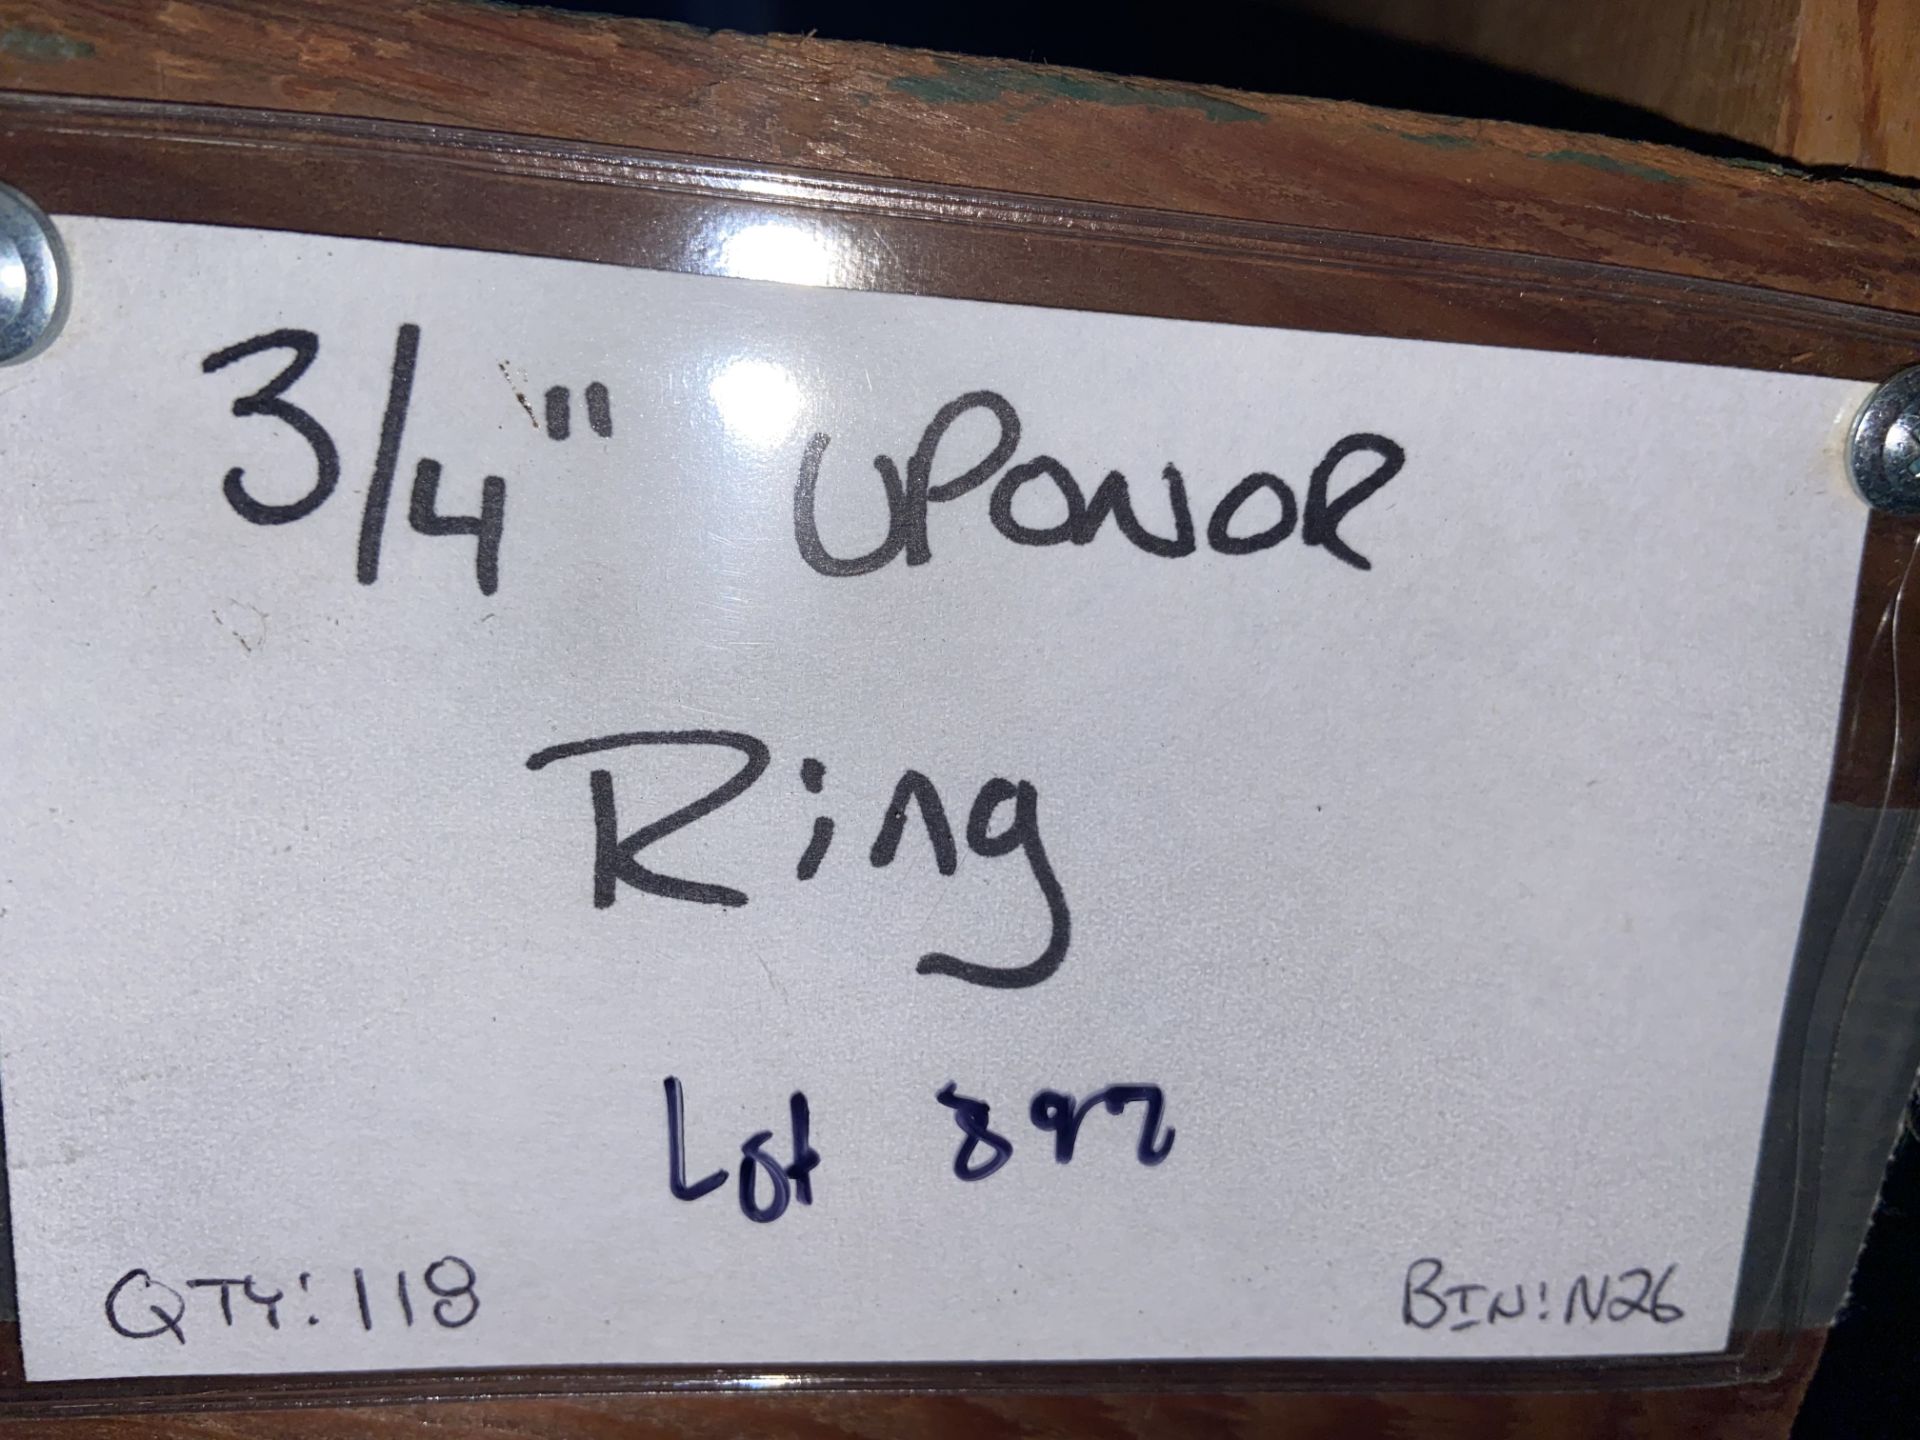 (118) 3/4” uponor ring (Bin:N26) (LOCATED IN MONROEVILLE, PA) - Image 2 of 2